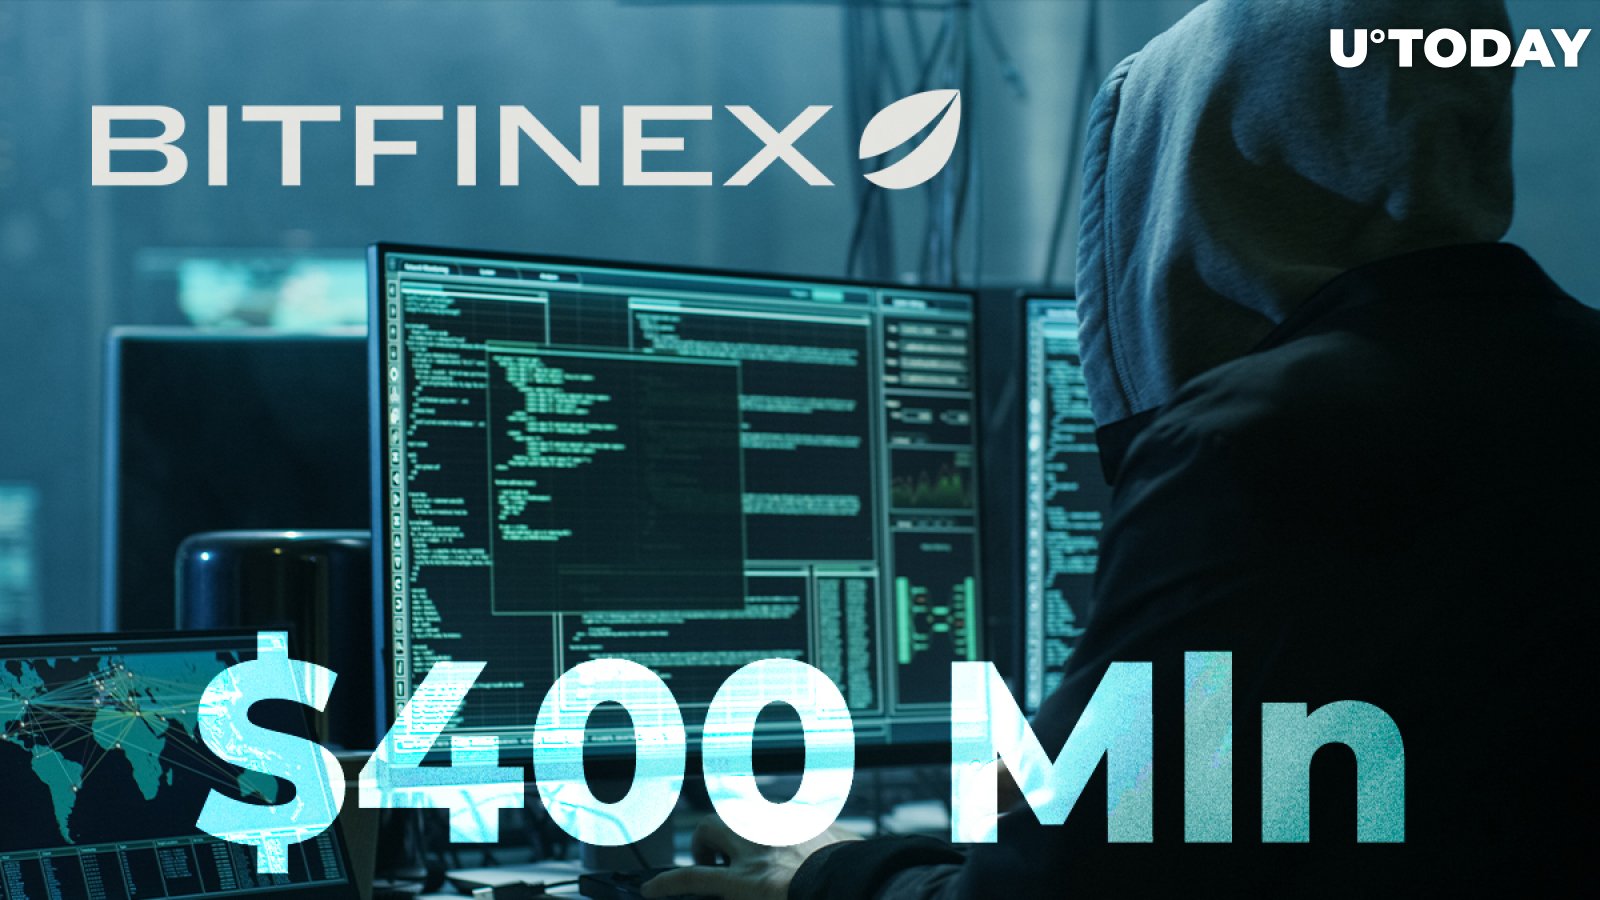 Bitfinex Will Pay $400 Mln to Hackers If They Return Bitcoins Stolen in 2016